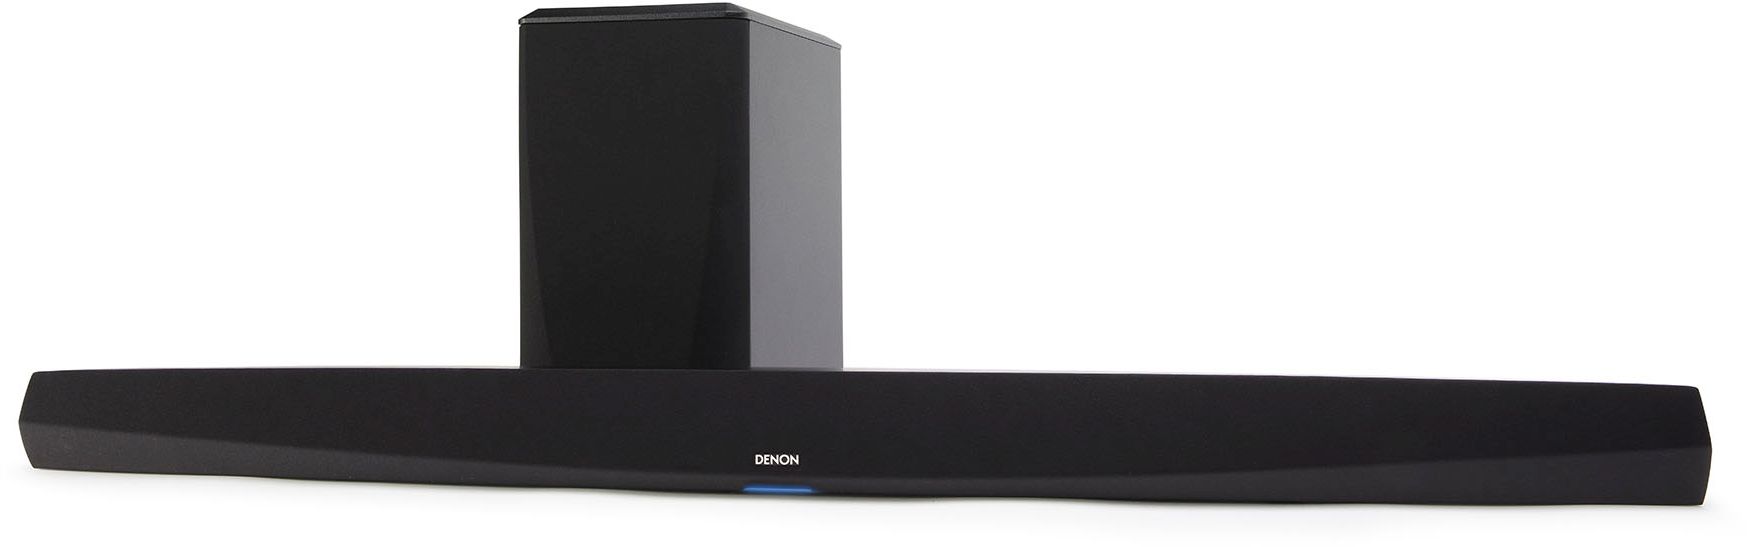 Denon® Sound Bar and Wireless Subwoofer-DHT-S516H | Creative Audio